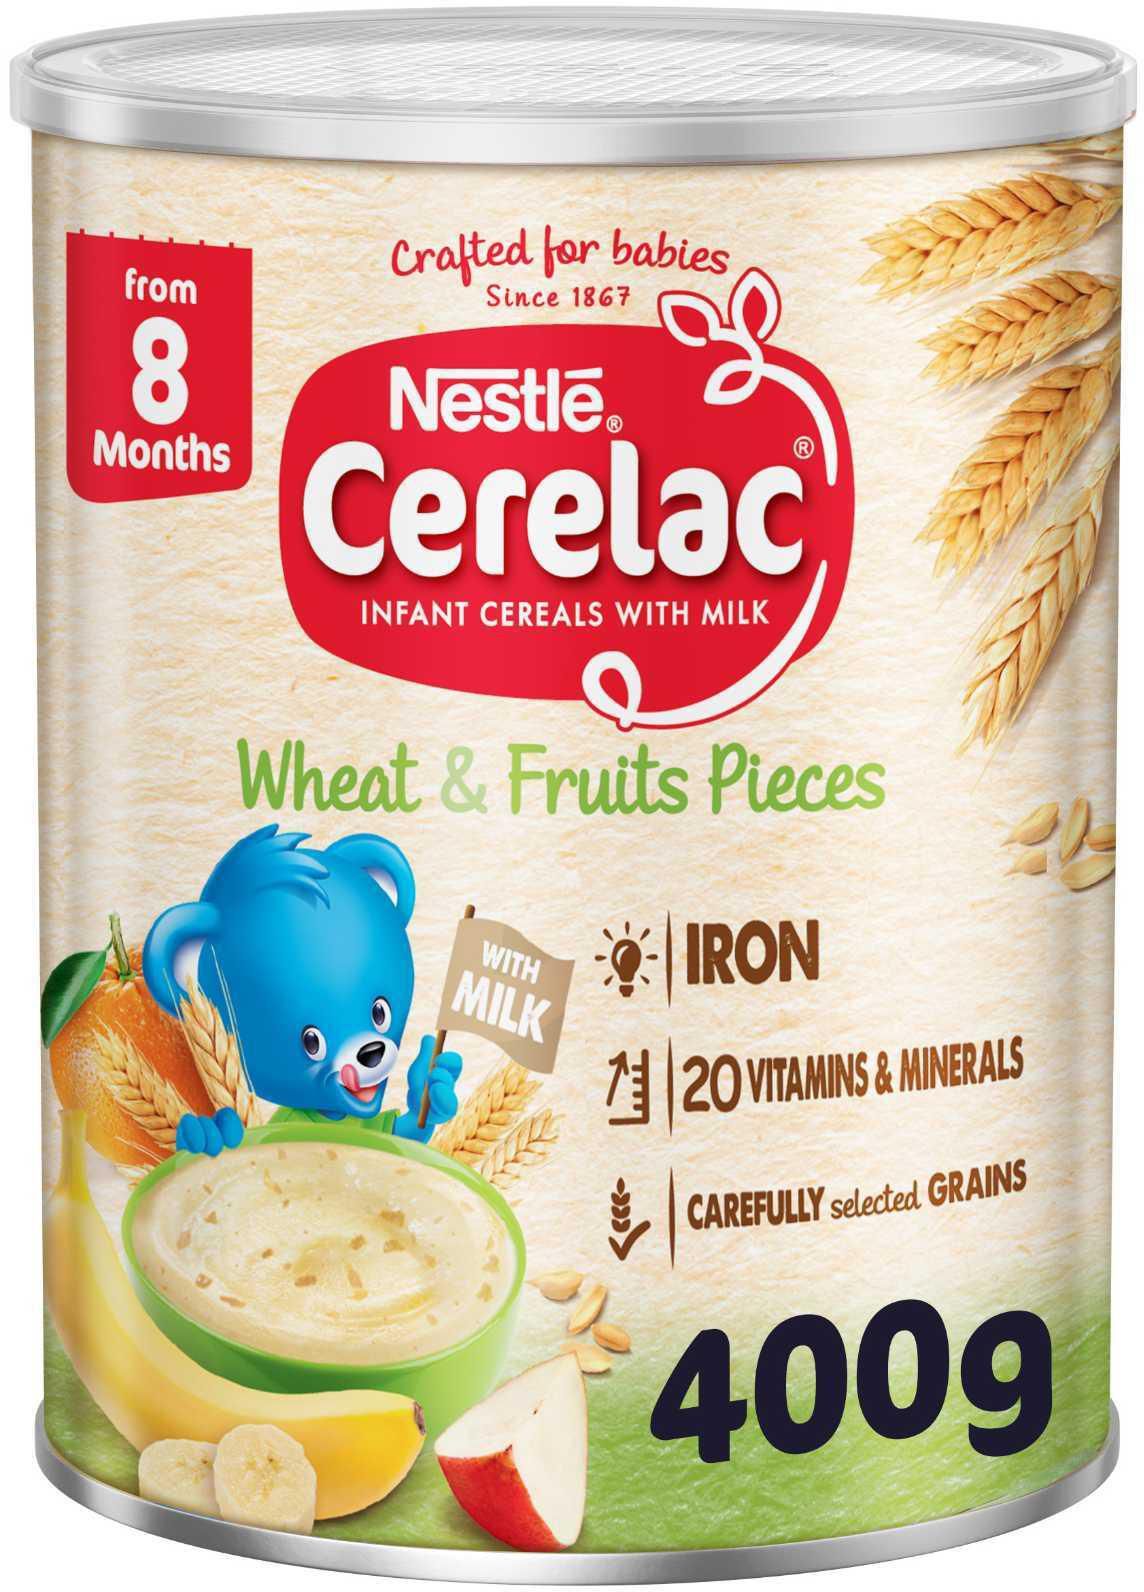 Nestle CERELAC Infant Cereals with iRON+ WHEAT and FRUIT PIECES from 8 months 400g Tin